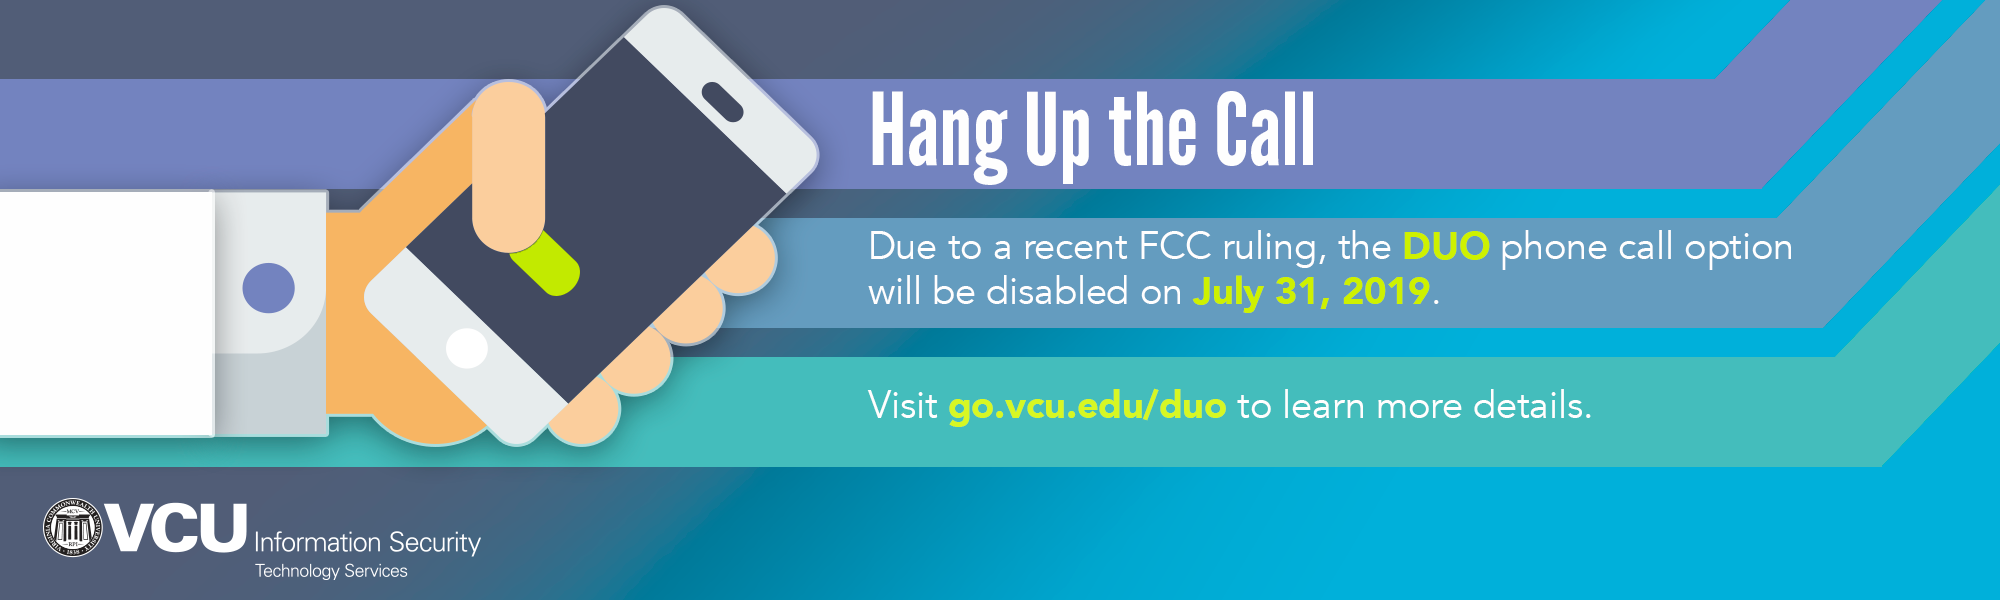 Graphic of a hand holding a cell phone with text: Hang up the call. due to recent FCC ruling, the DUO phone call option will be disabled on july 31, 2019. Visit go.vcu.edu/duo to learn more details